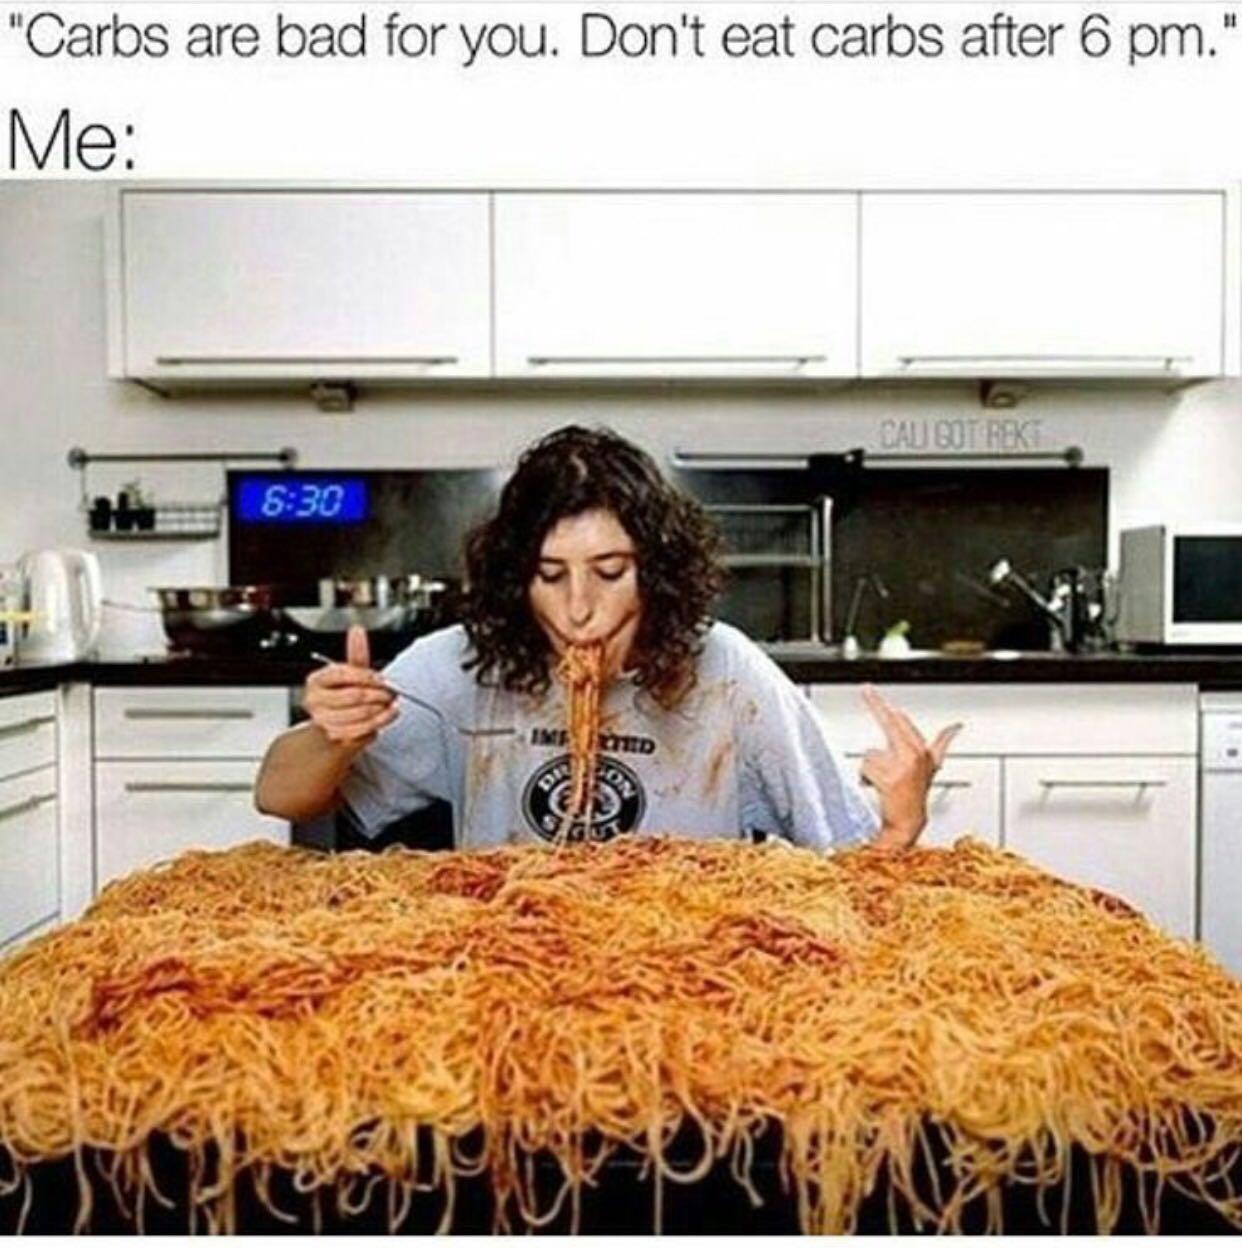 funny memes pics and tweets - carbs meme funny - "Carbs are bad for you. Don't eat carbs after 6 pm." Me Ime Ted Dr On Cali Bot Rekt Se